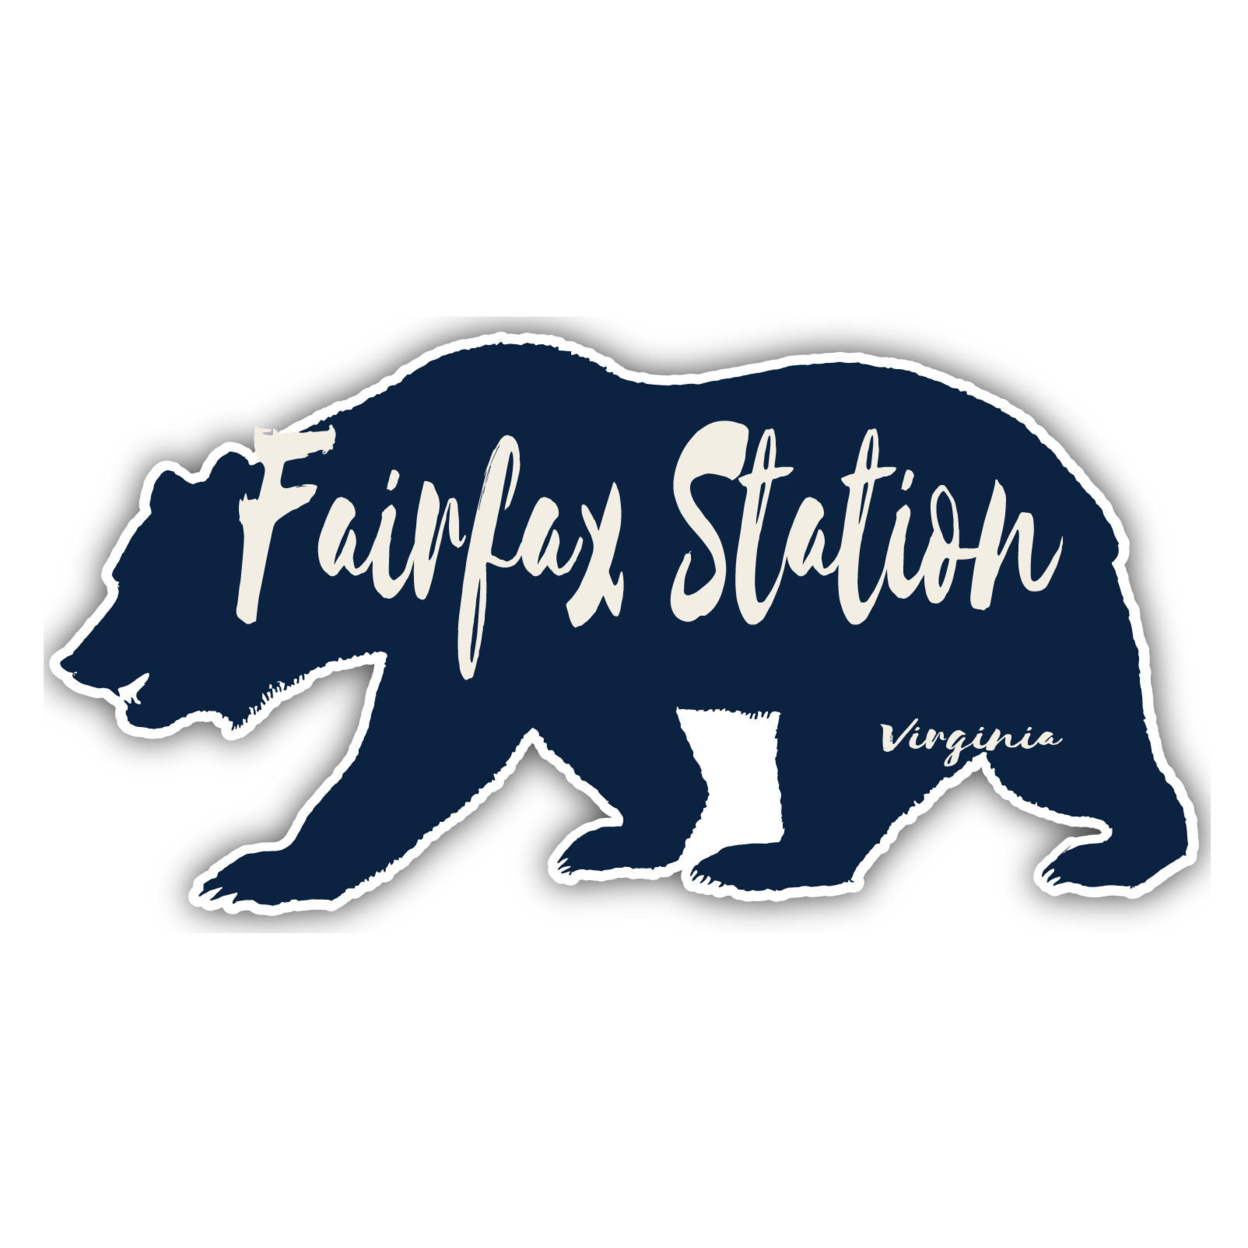 Fairfax Station Virginia Souvenir Decorative Stickers (Choose Theme And Size) - Single Unit, 12-Inch, Great Outdoors